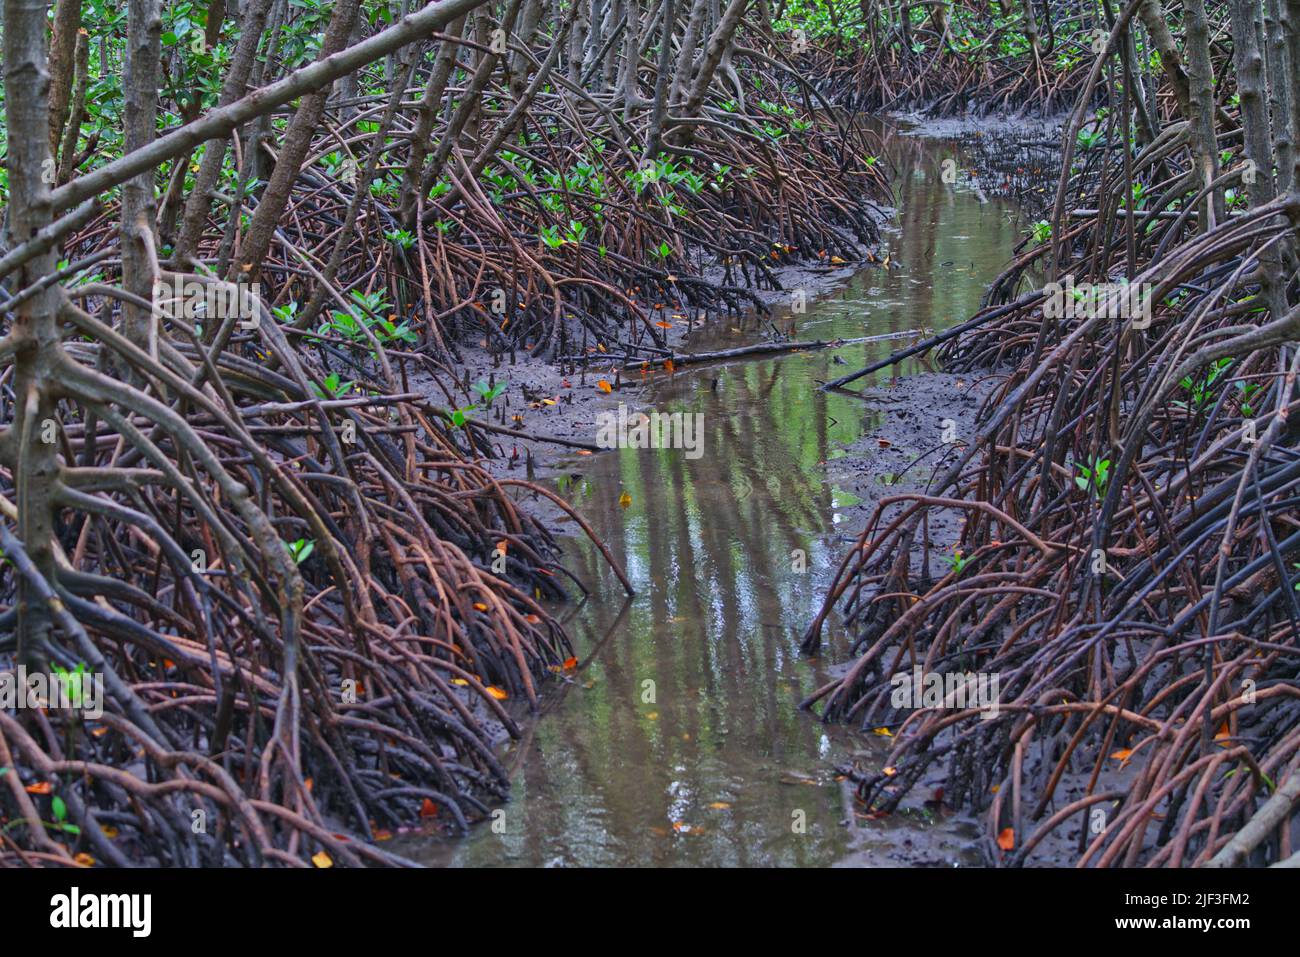 In the mangrove forest, a small stream that flows through the mangrove forest. Stock Photo